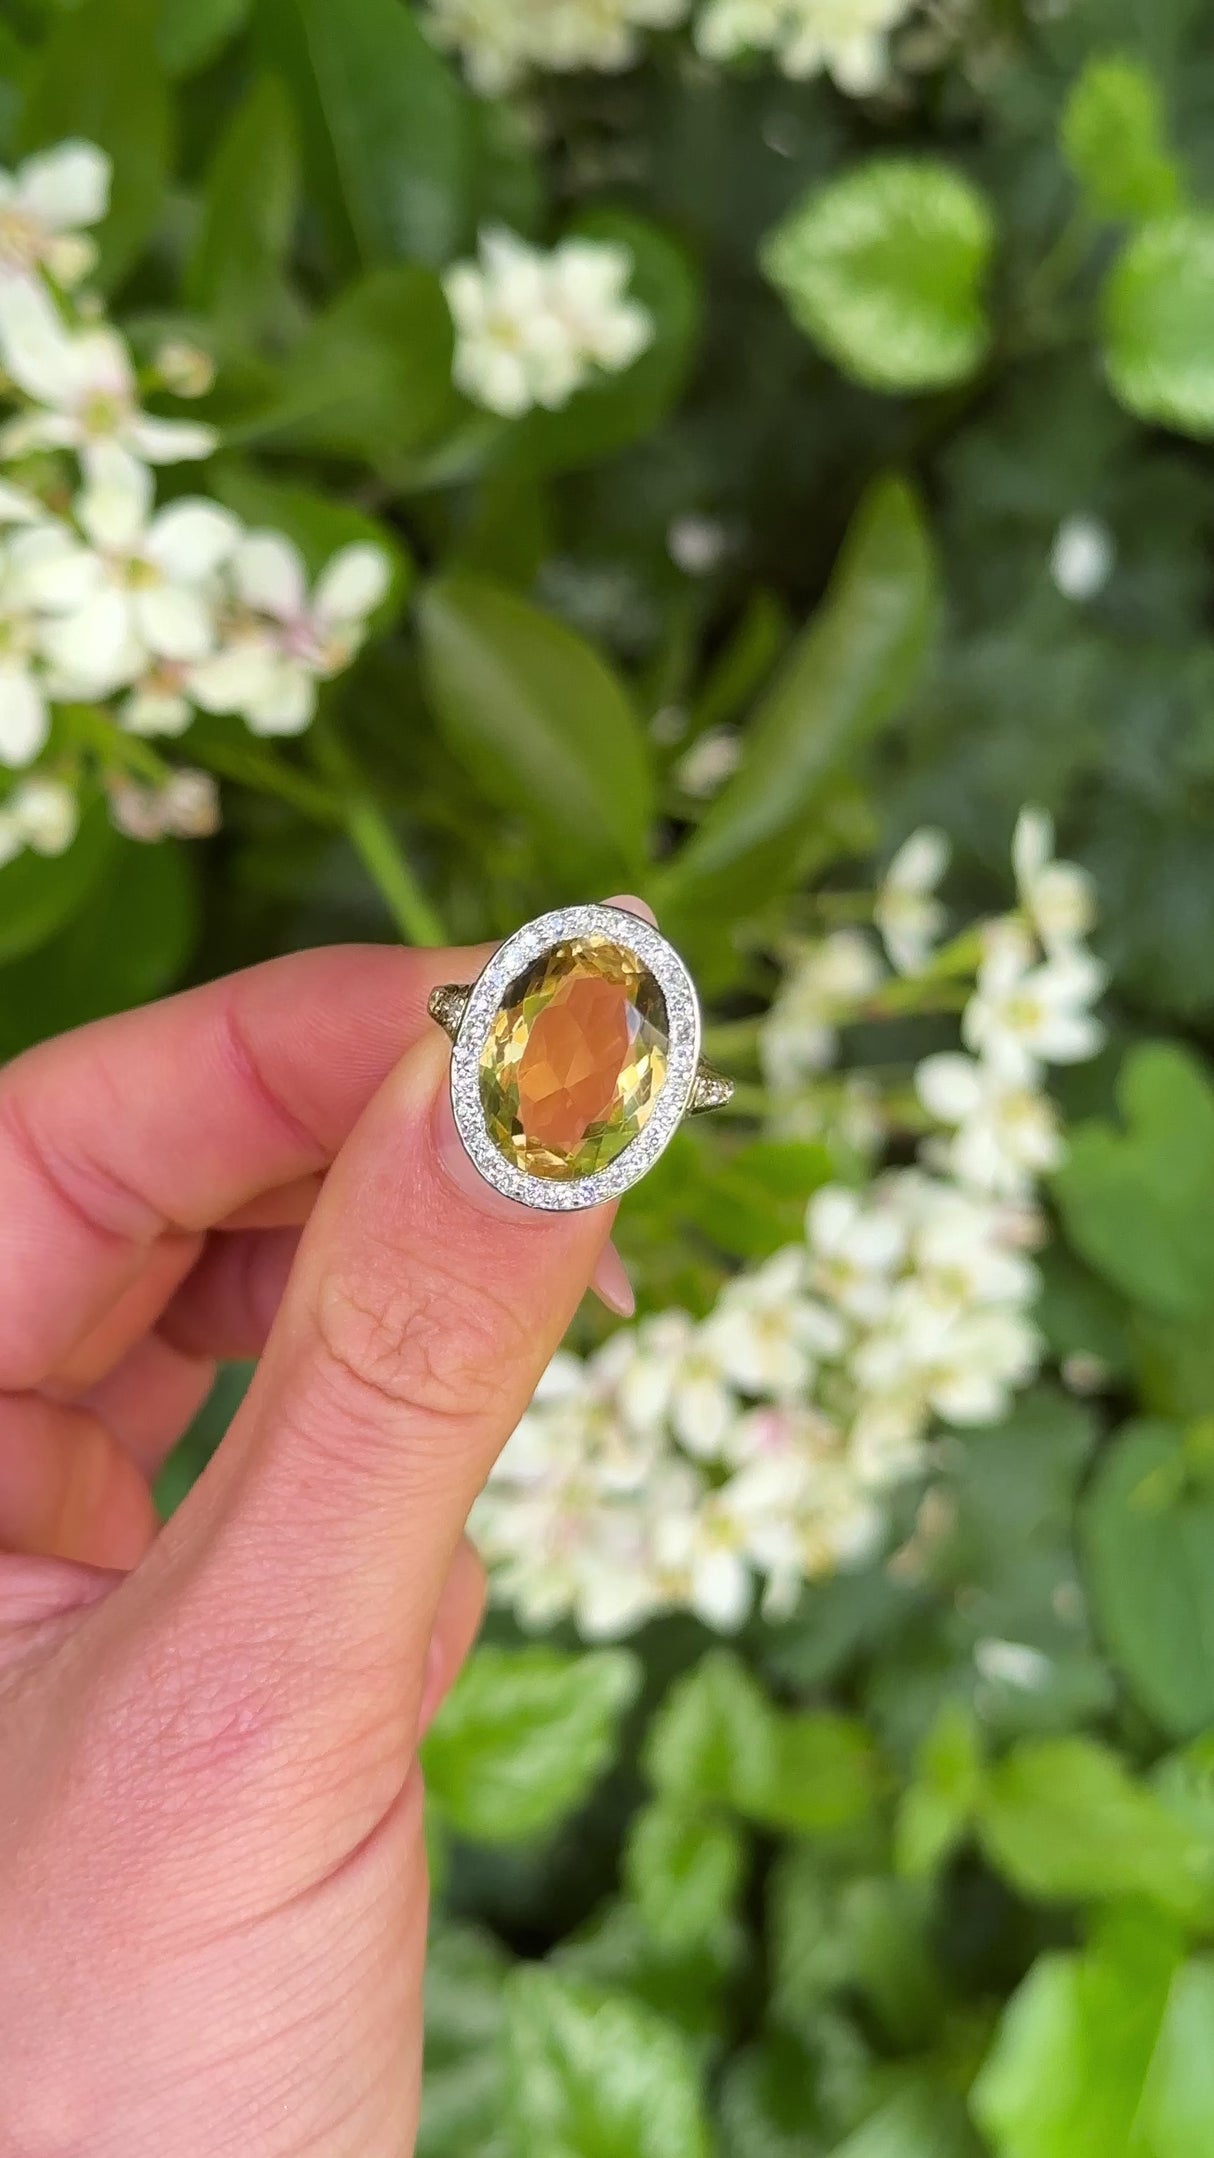 Vintage, Citrine and Diamond Cluster Ring, 18ct Yellow Gold and Platinum held in fingers.